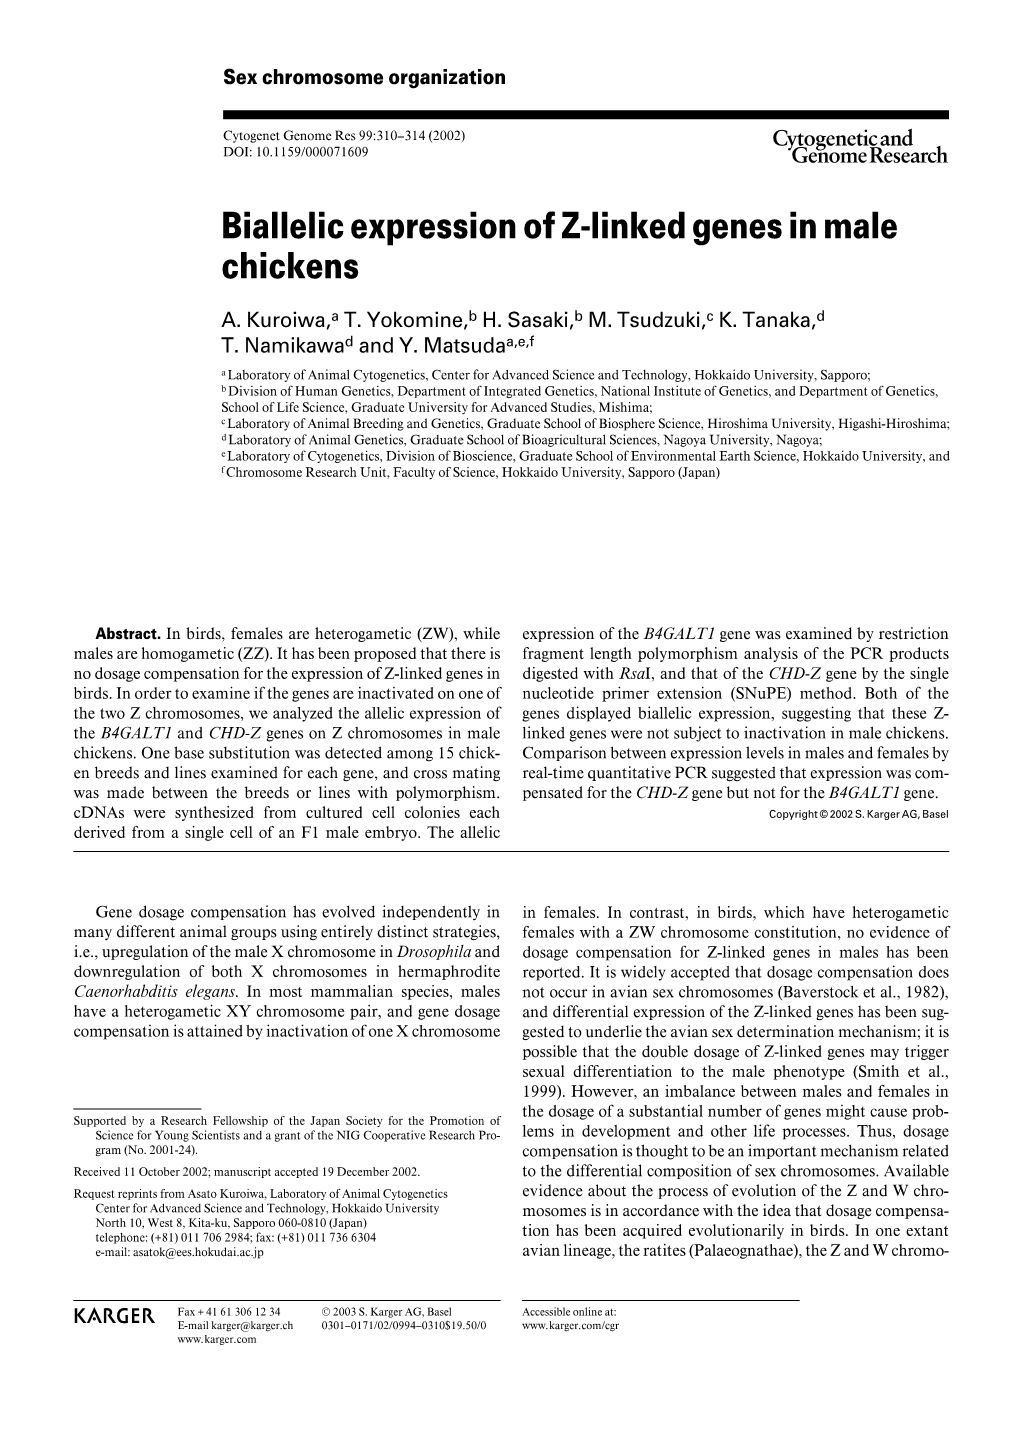 Biallelic Expression of Z-Linked Genes in Male Chickens